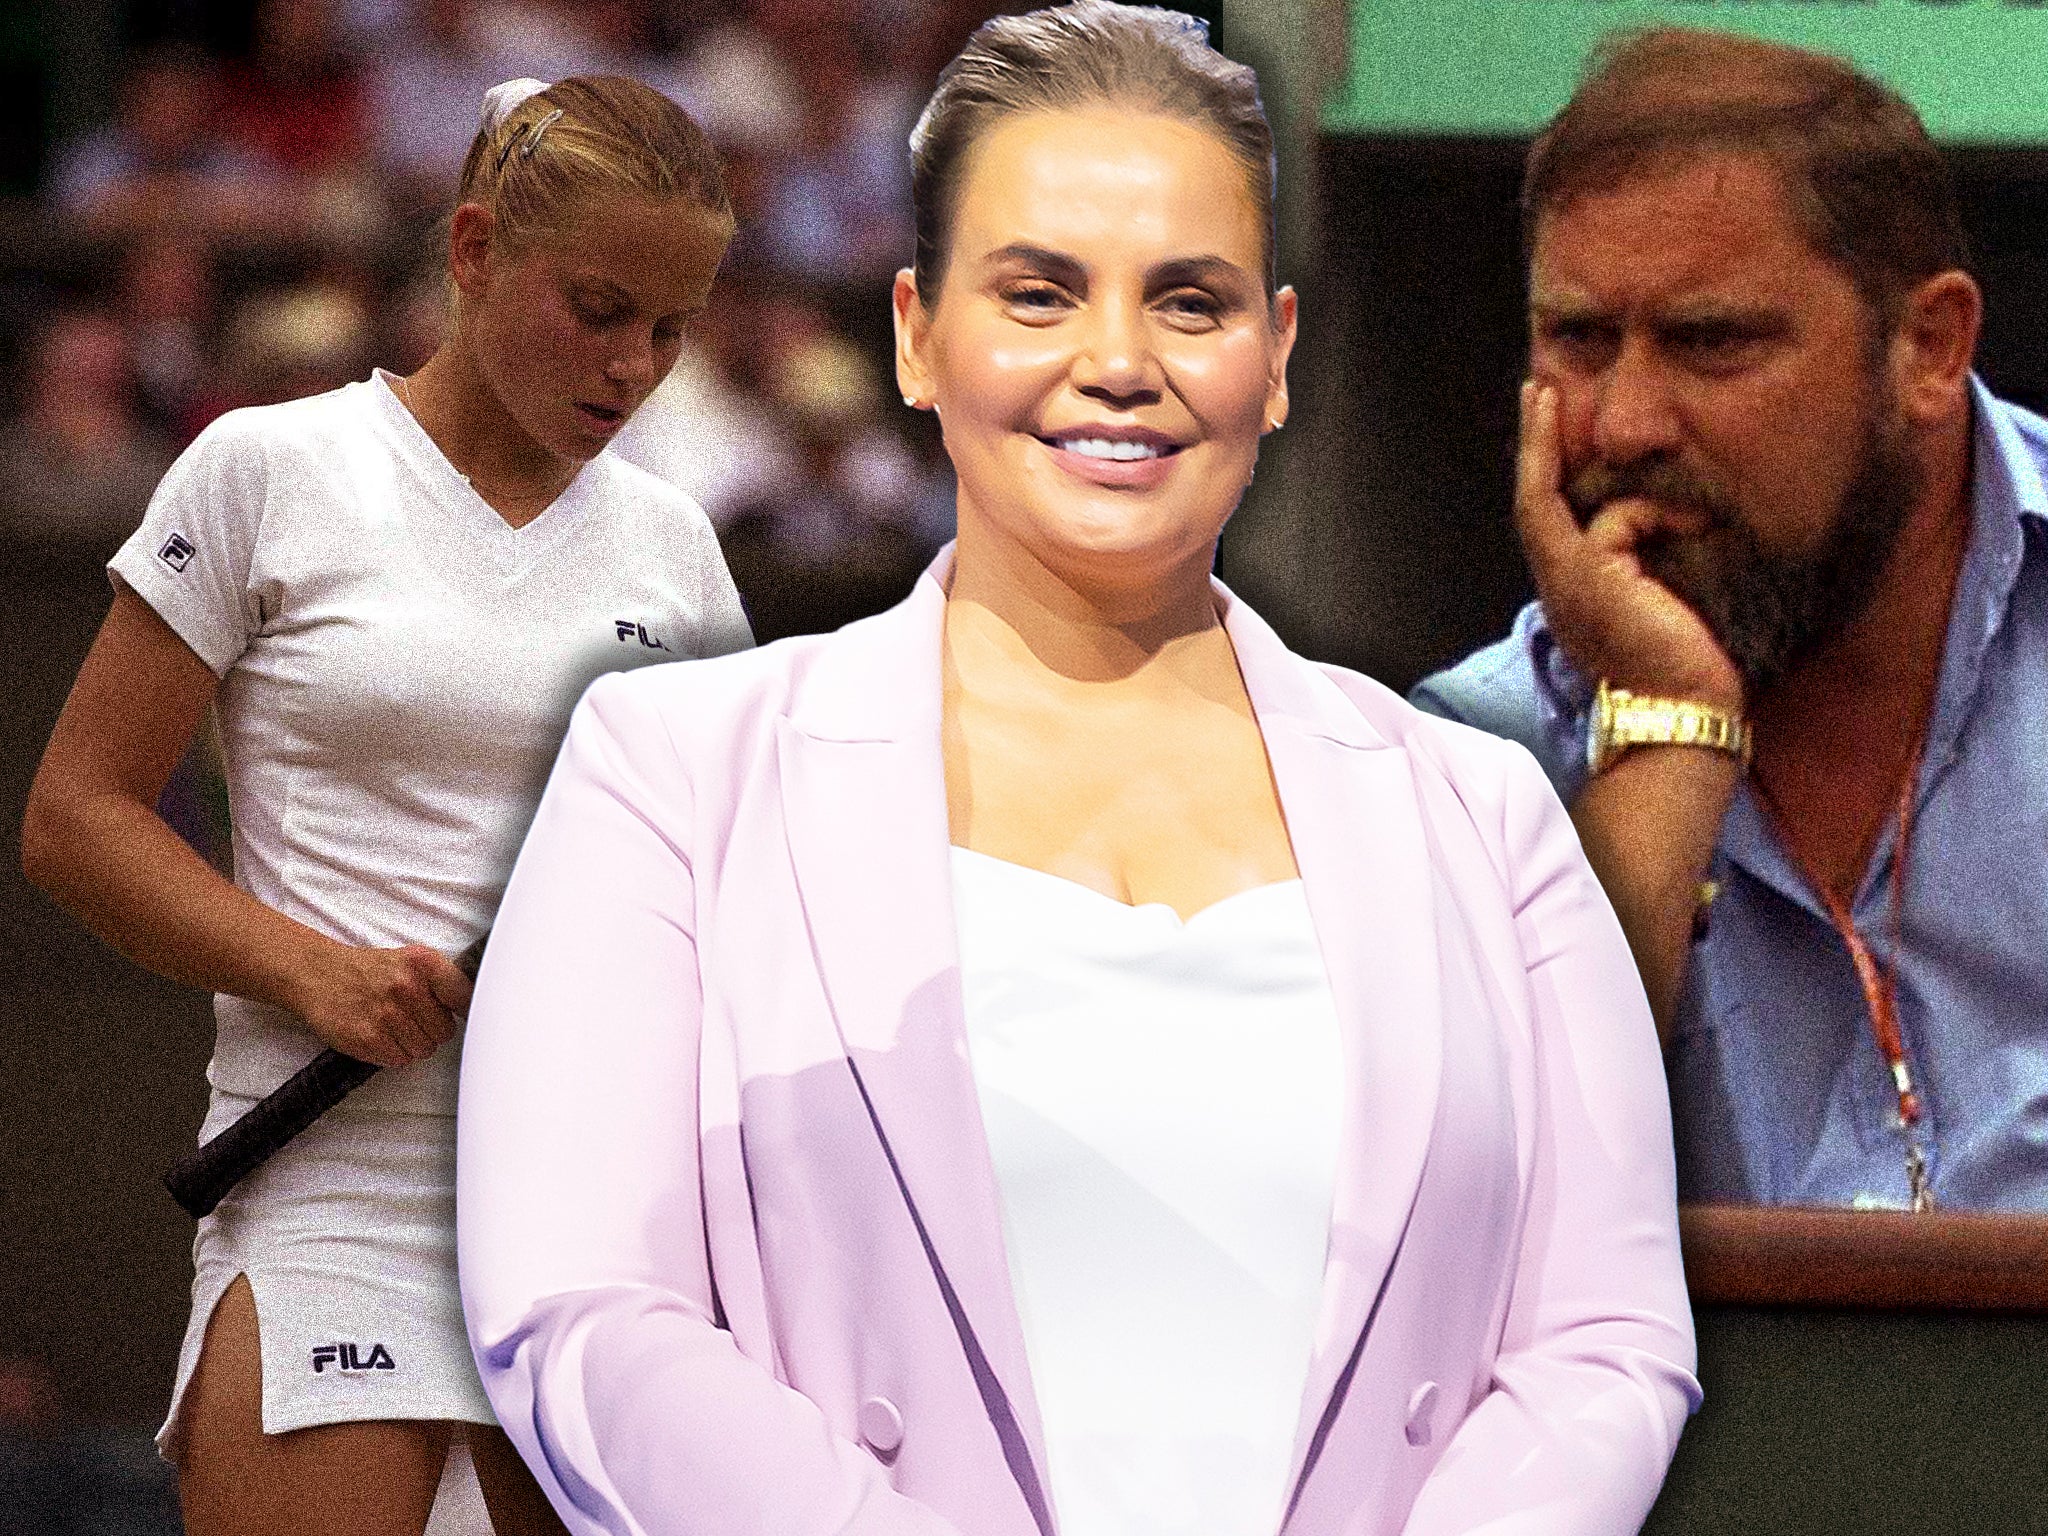 Jelena Dokic has cut ties with her father but is happier than ever, as she tells The Independent